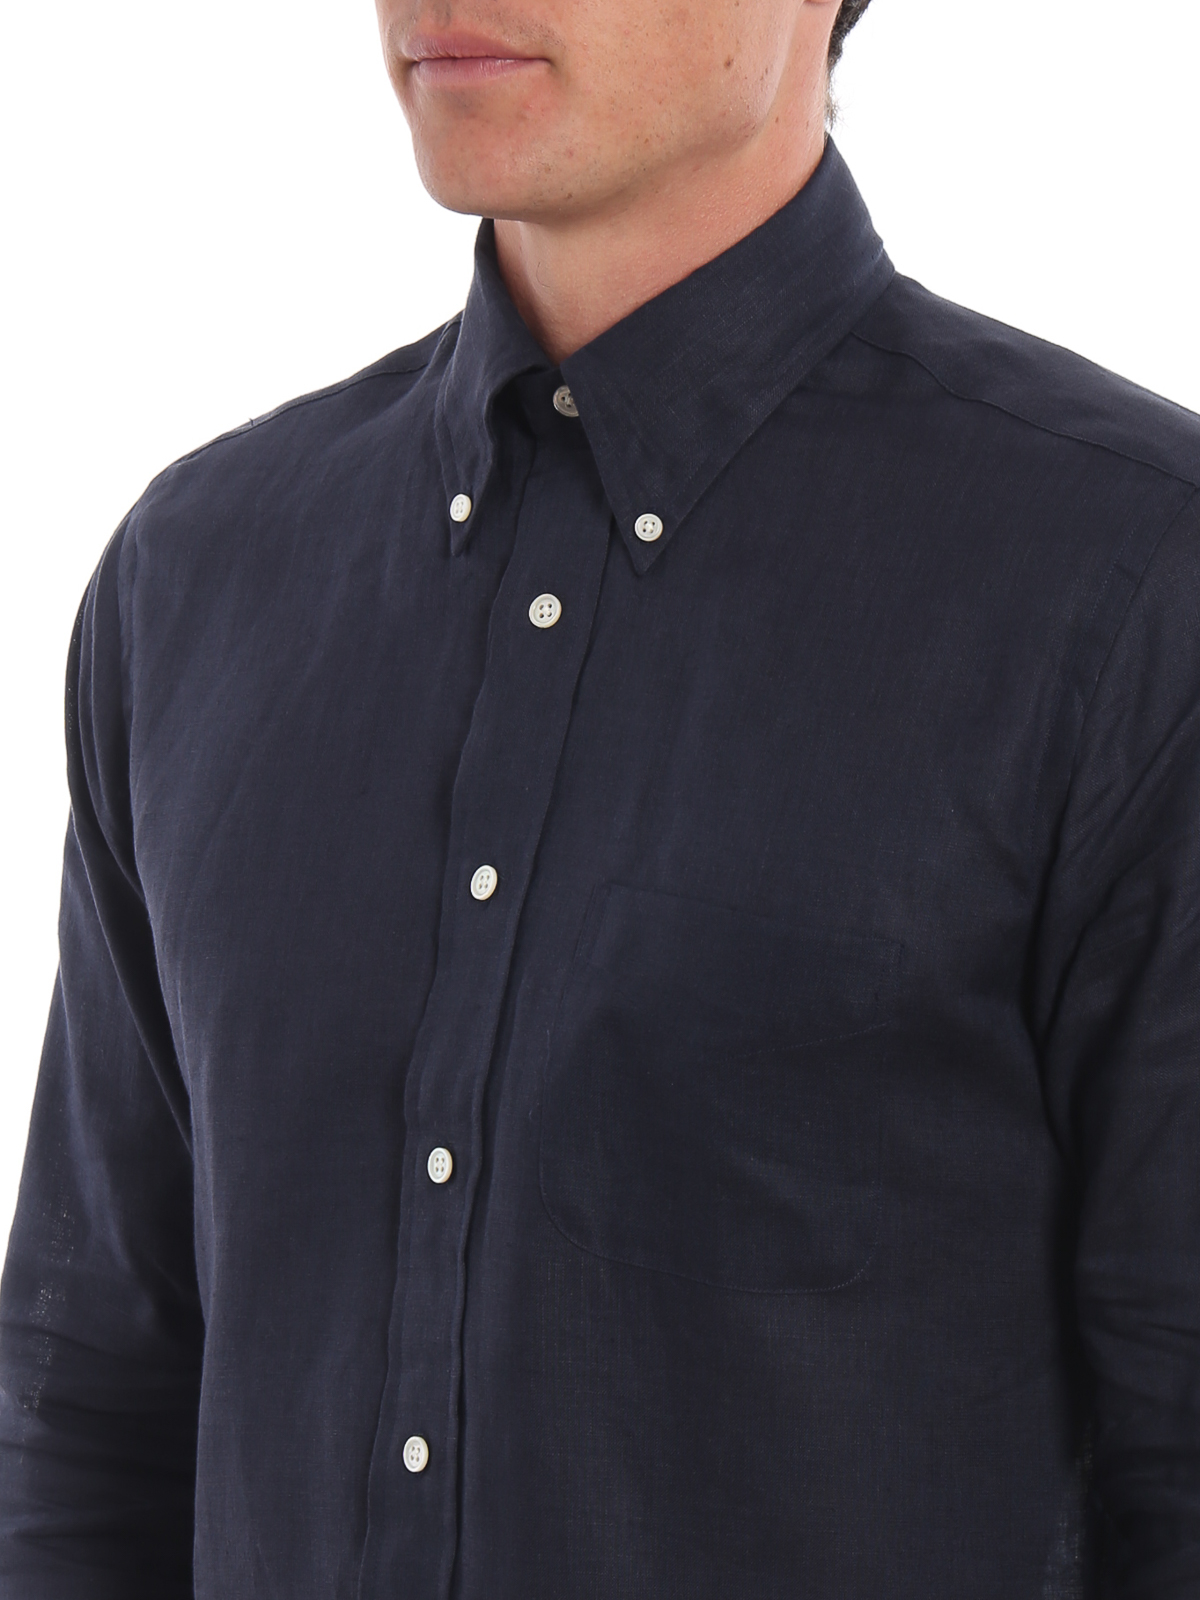 buy brooks brothers shirts online